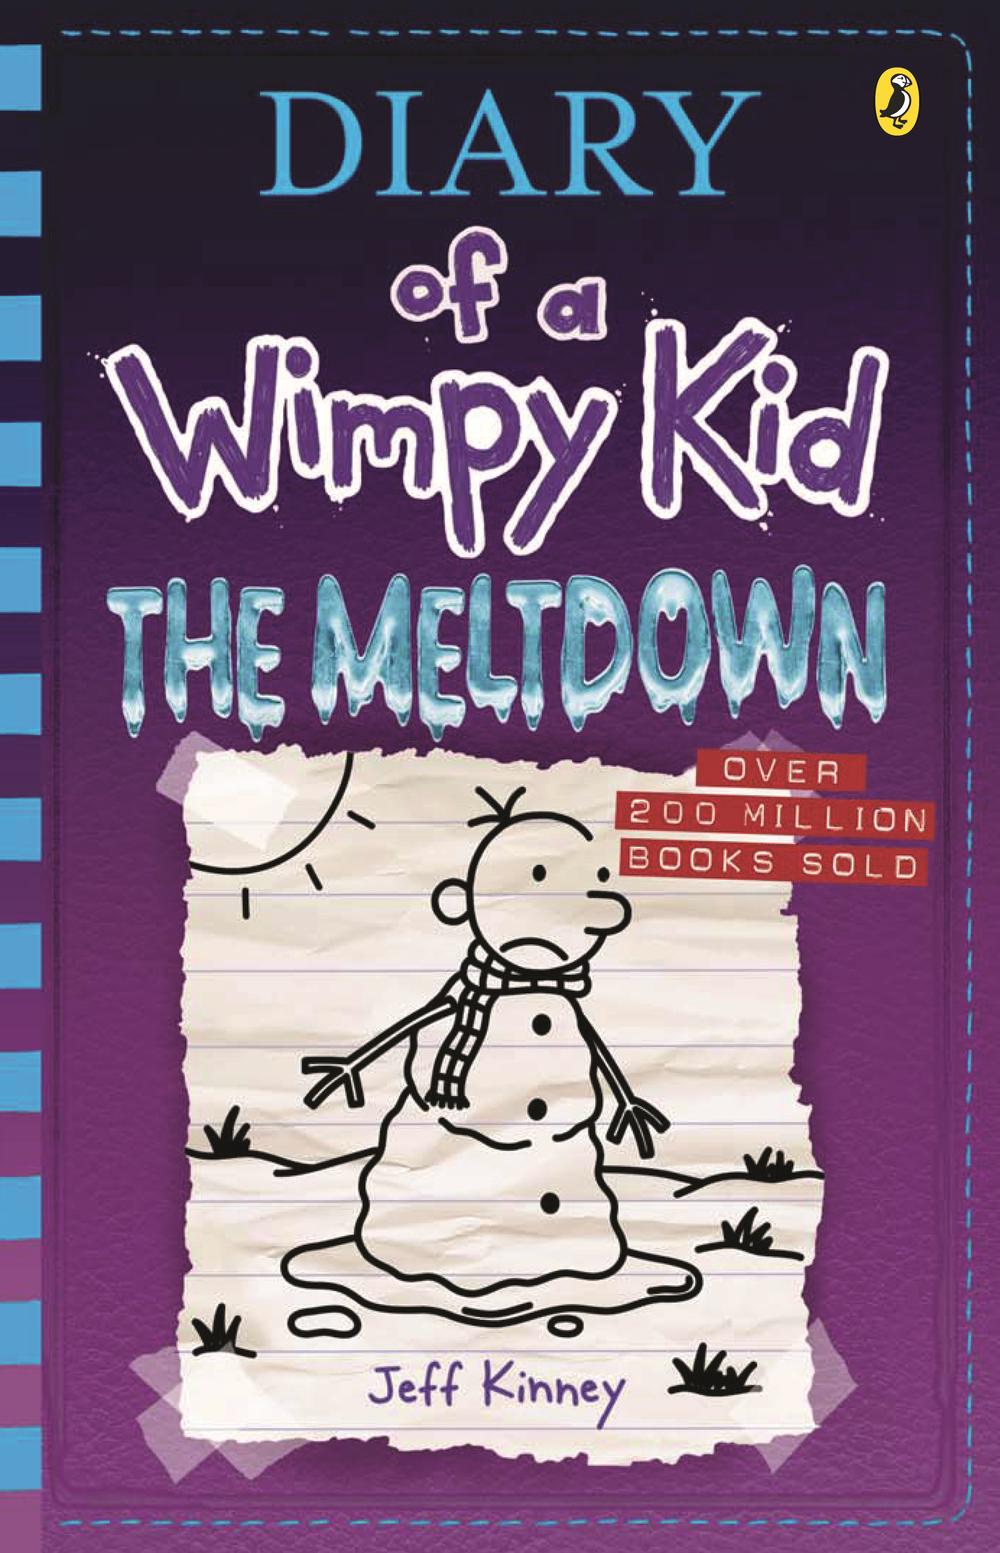 book review for diary of a wimpy kid